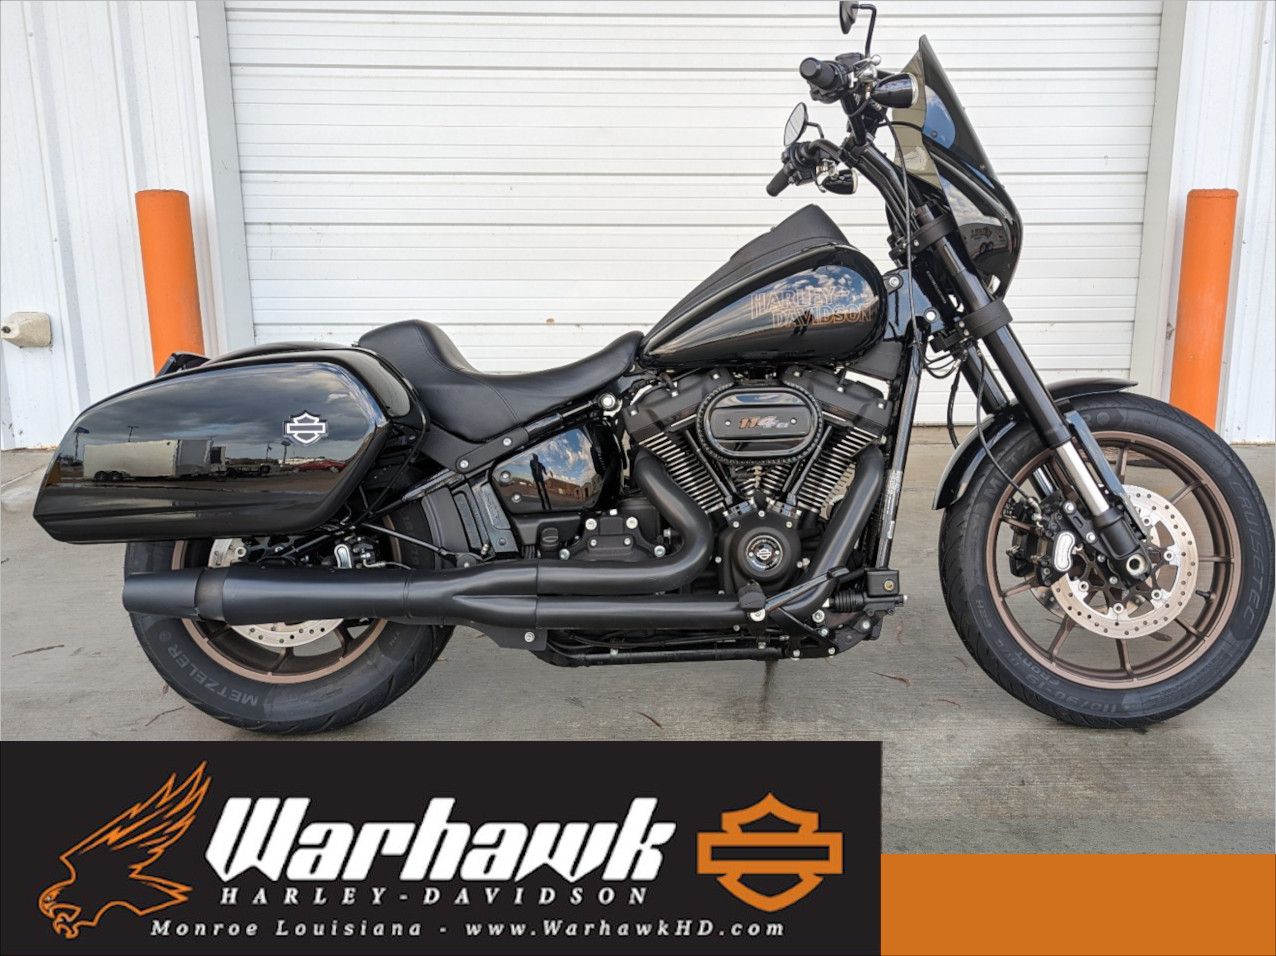 2020 harley-davidson low rider s for sale near me - Photo 1